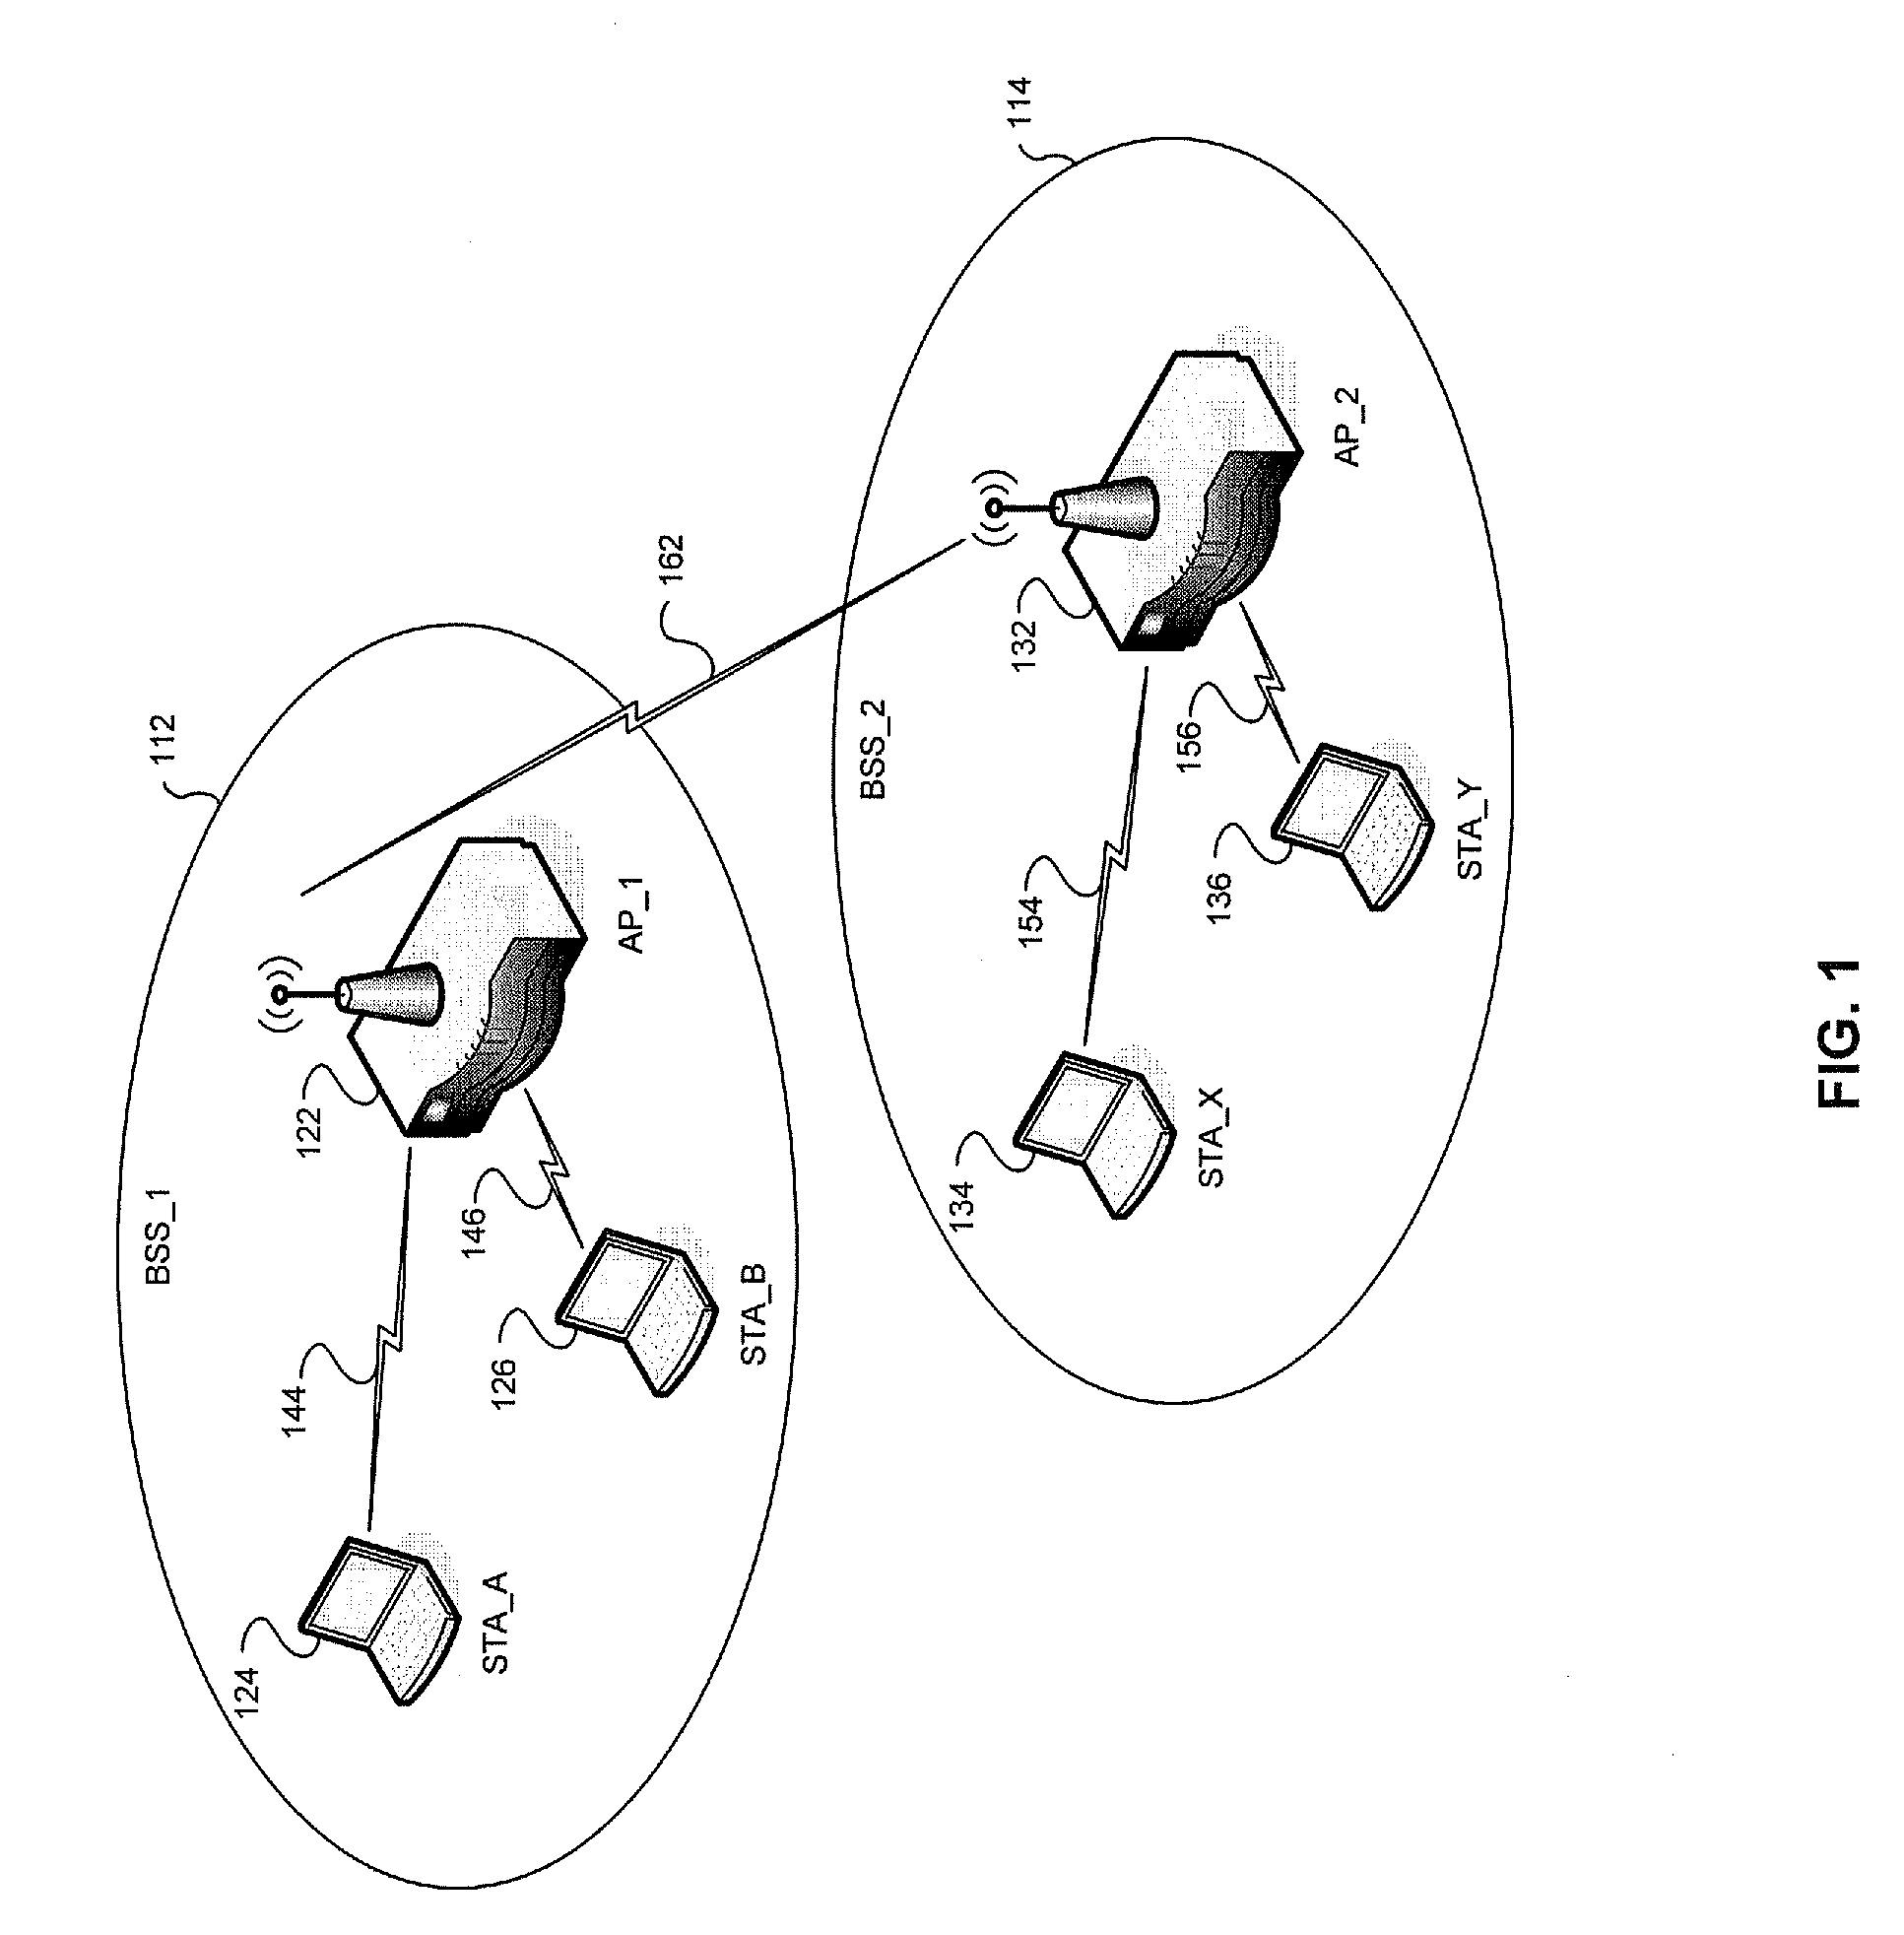 Method and System for Detection of Long Pulse Bin 5 Radars in the Presence of Greenfield Packets